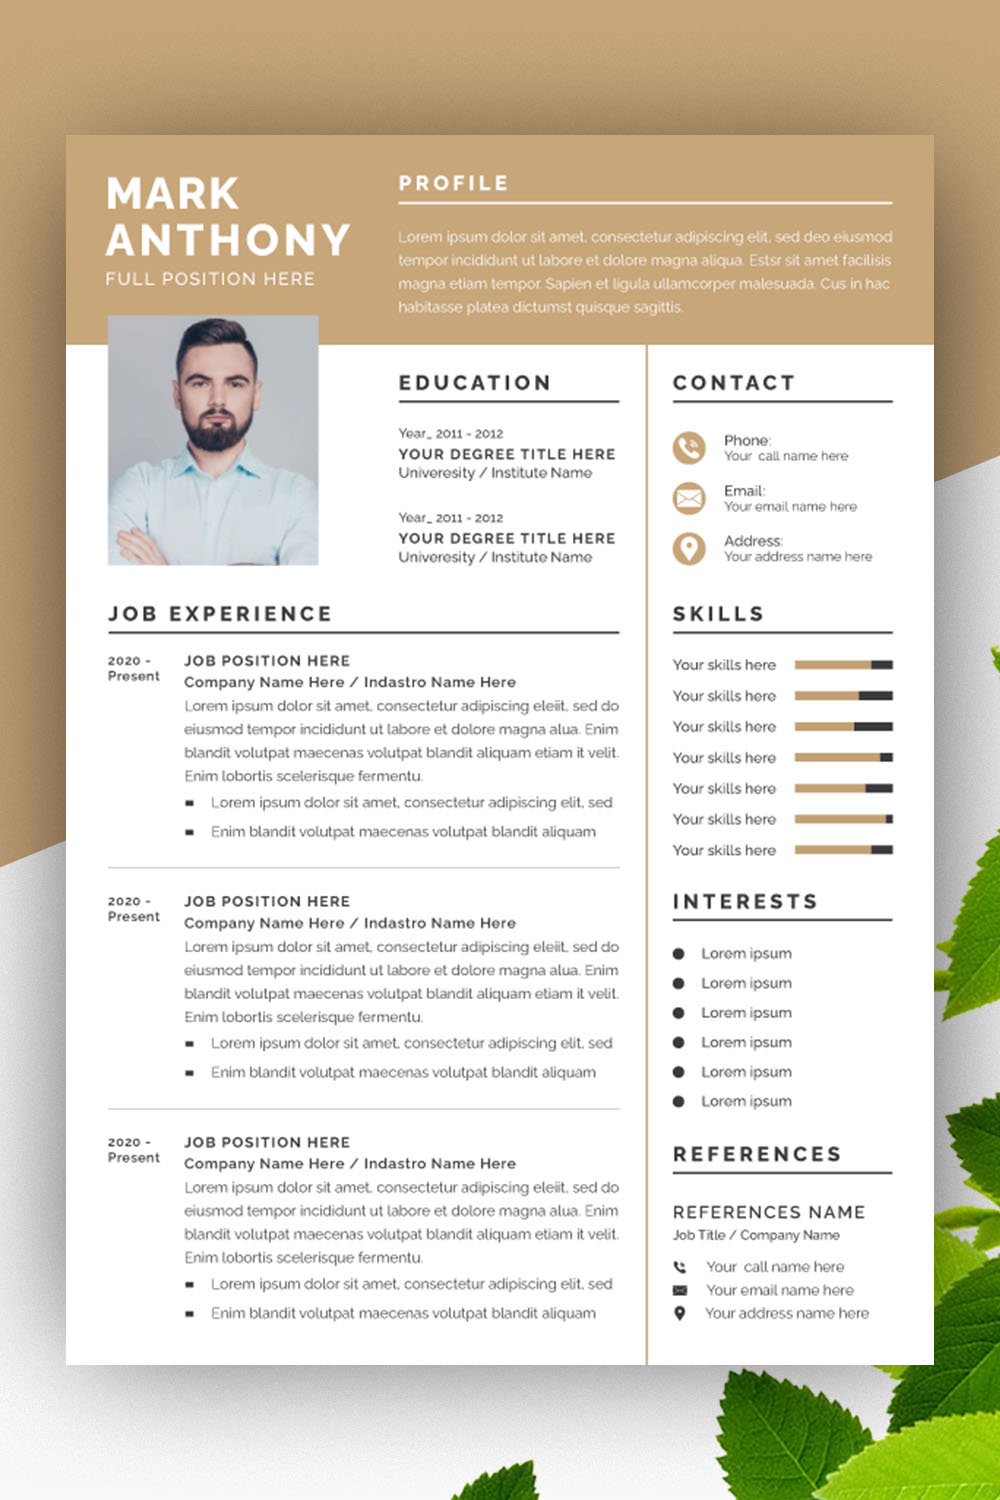 Clean Resume Layout with Cover Letter Layout Set pinterest preview image.